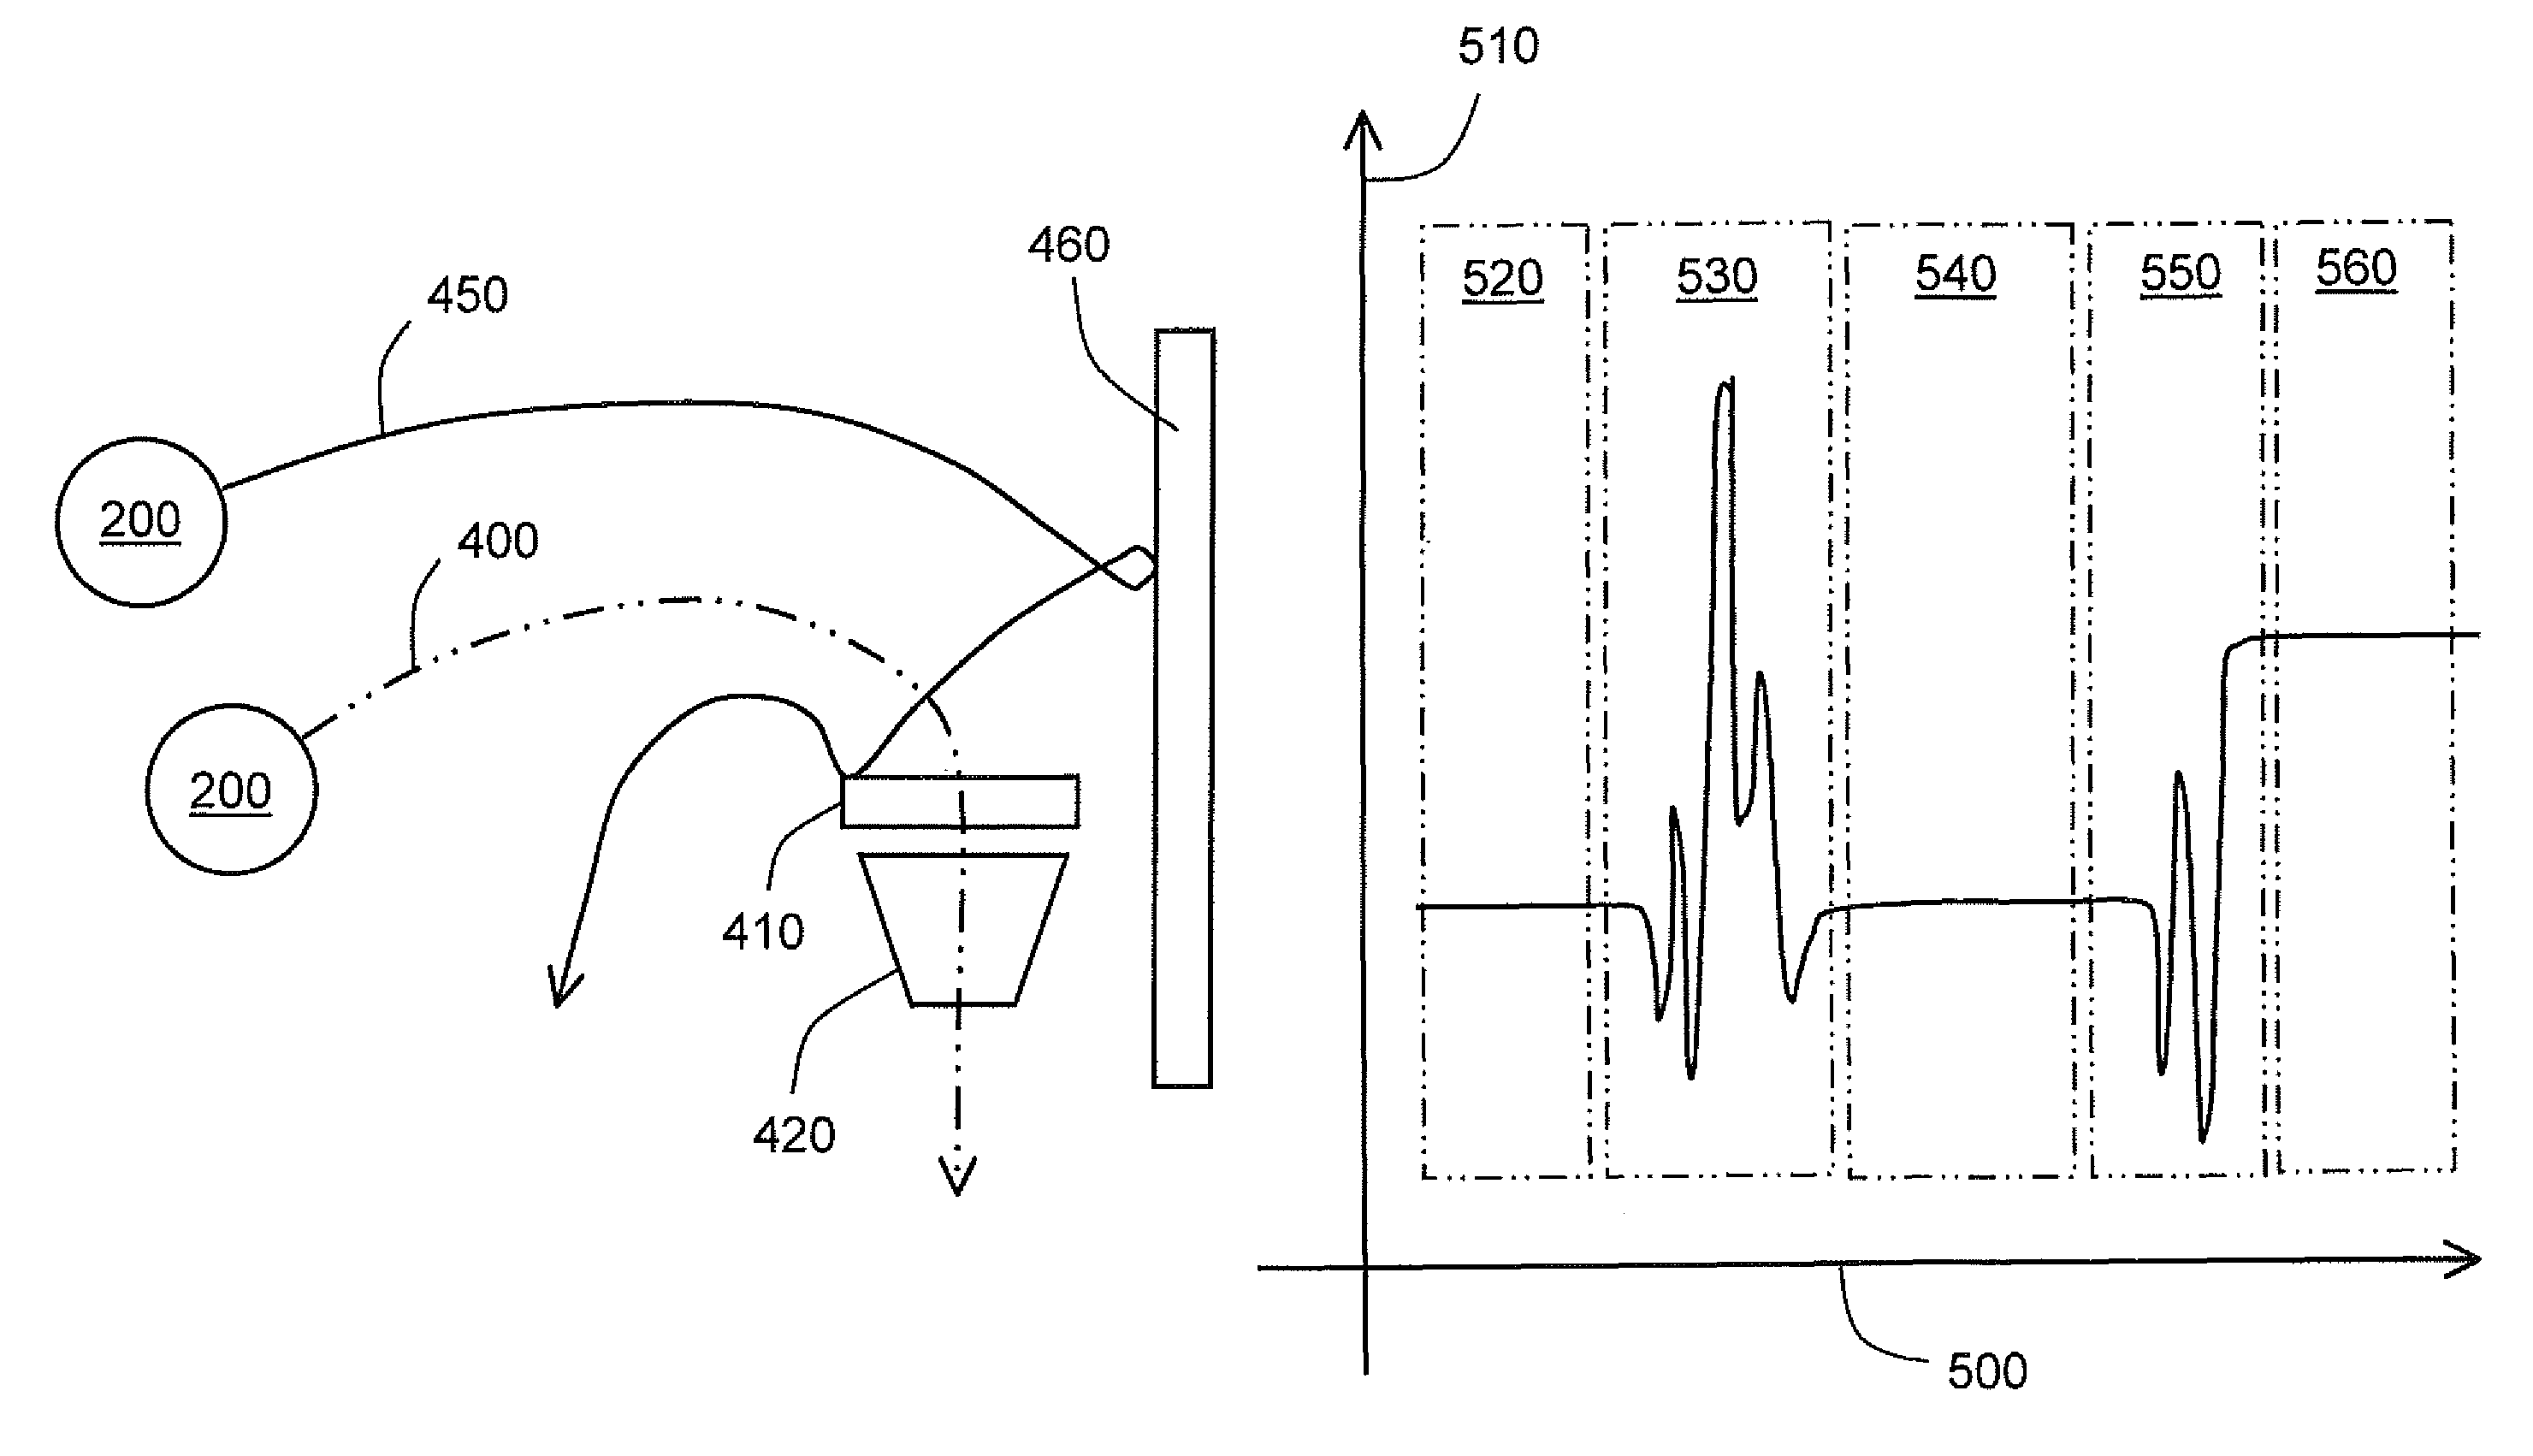 Method and system for monitoring movement of a sport projectile